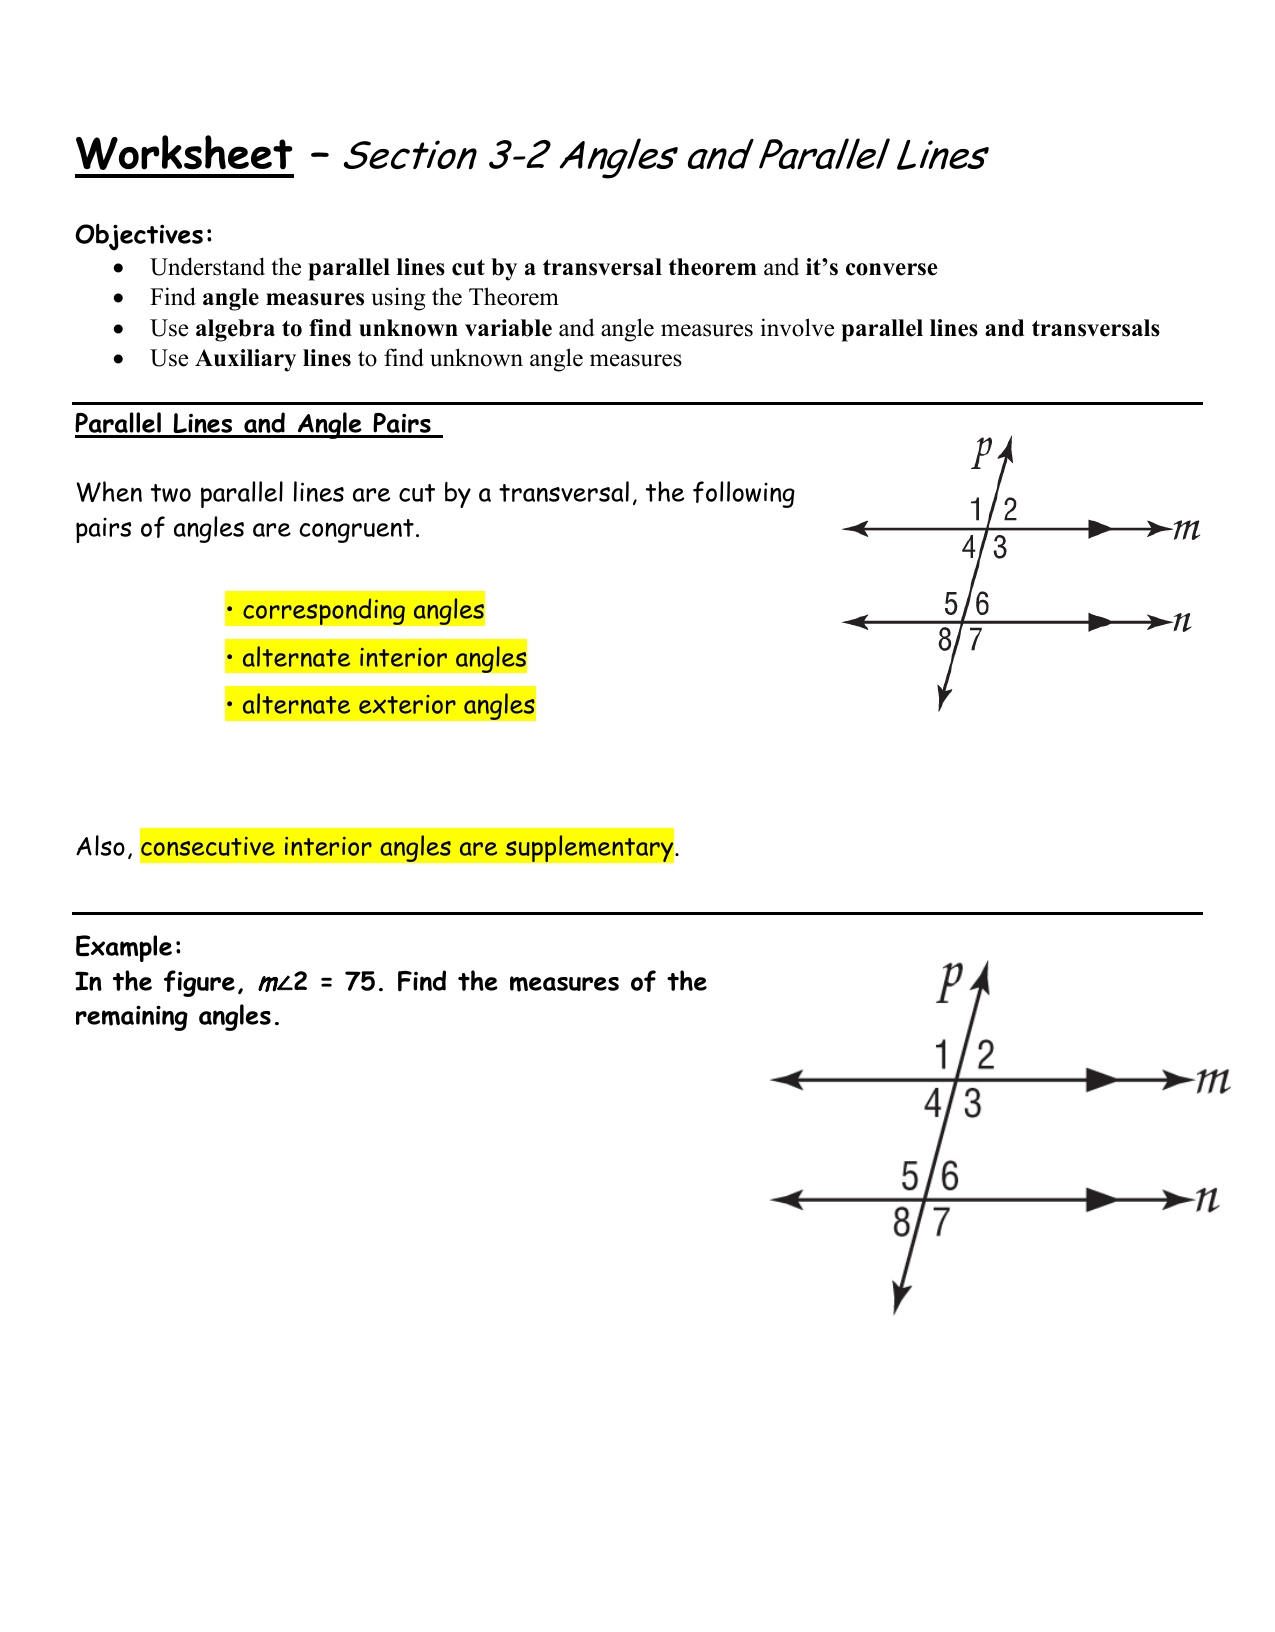 Worksheet Section 21 Angles and Parallel Lines For Finding Angle Measures Worksheet